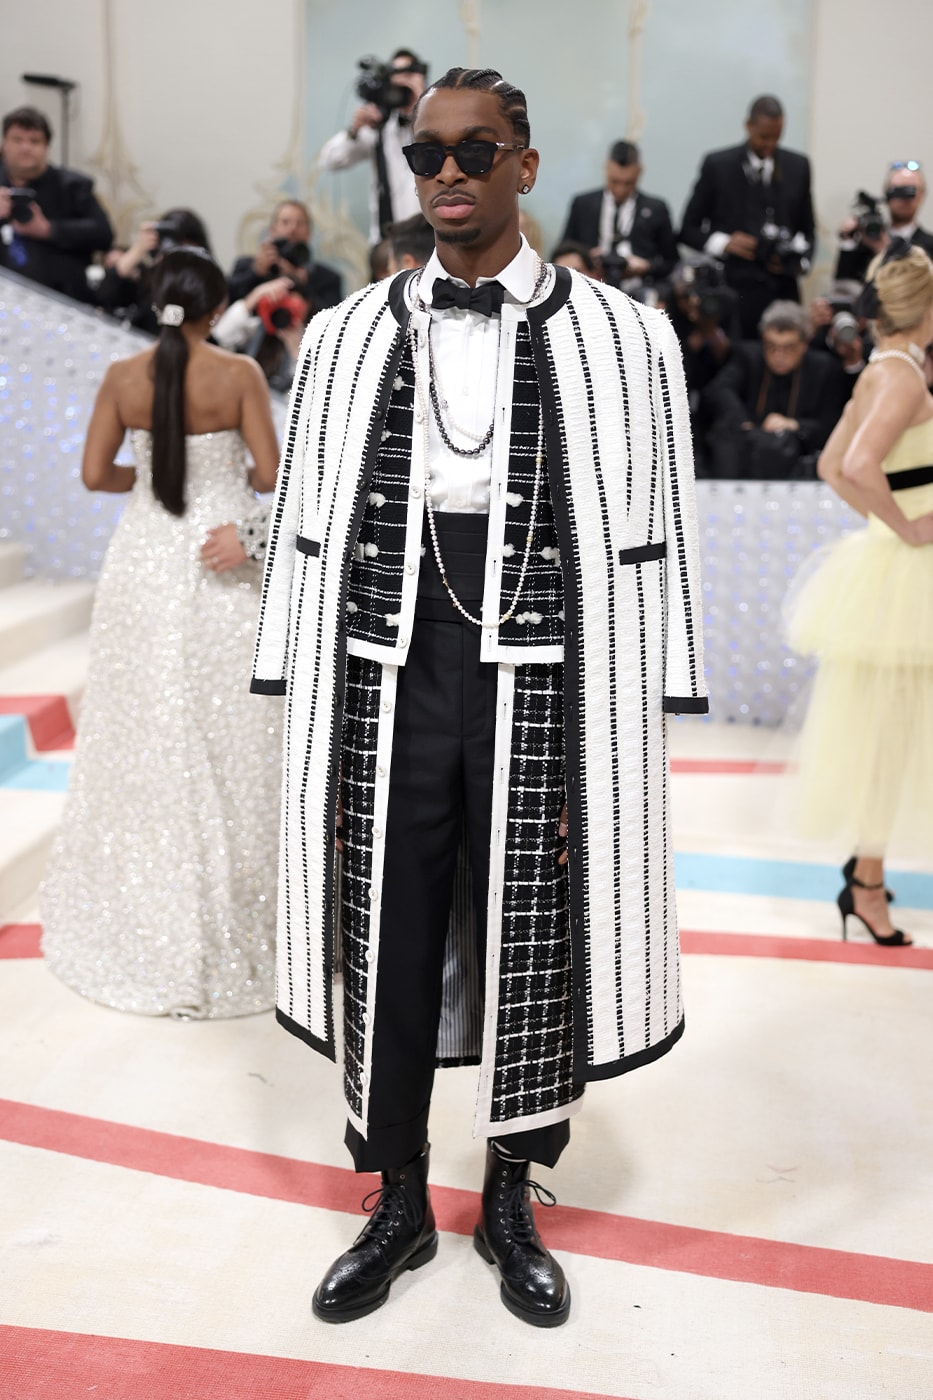 Most Talked About Moments at Met Gala 2023 Karl Lagerfeld: A Line of Beauty biggest fits jared leto lil nas x cardi b simu liu choupette fendi chanel nicole kidman key huay quan michelle yeoh lilly collins bad bunny kendall jenner kylie jenner